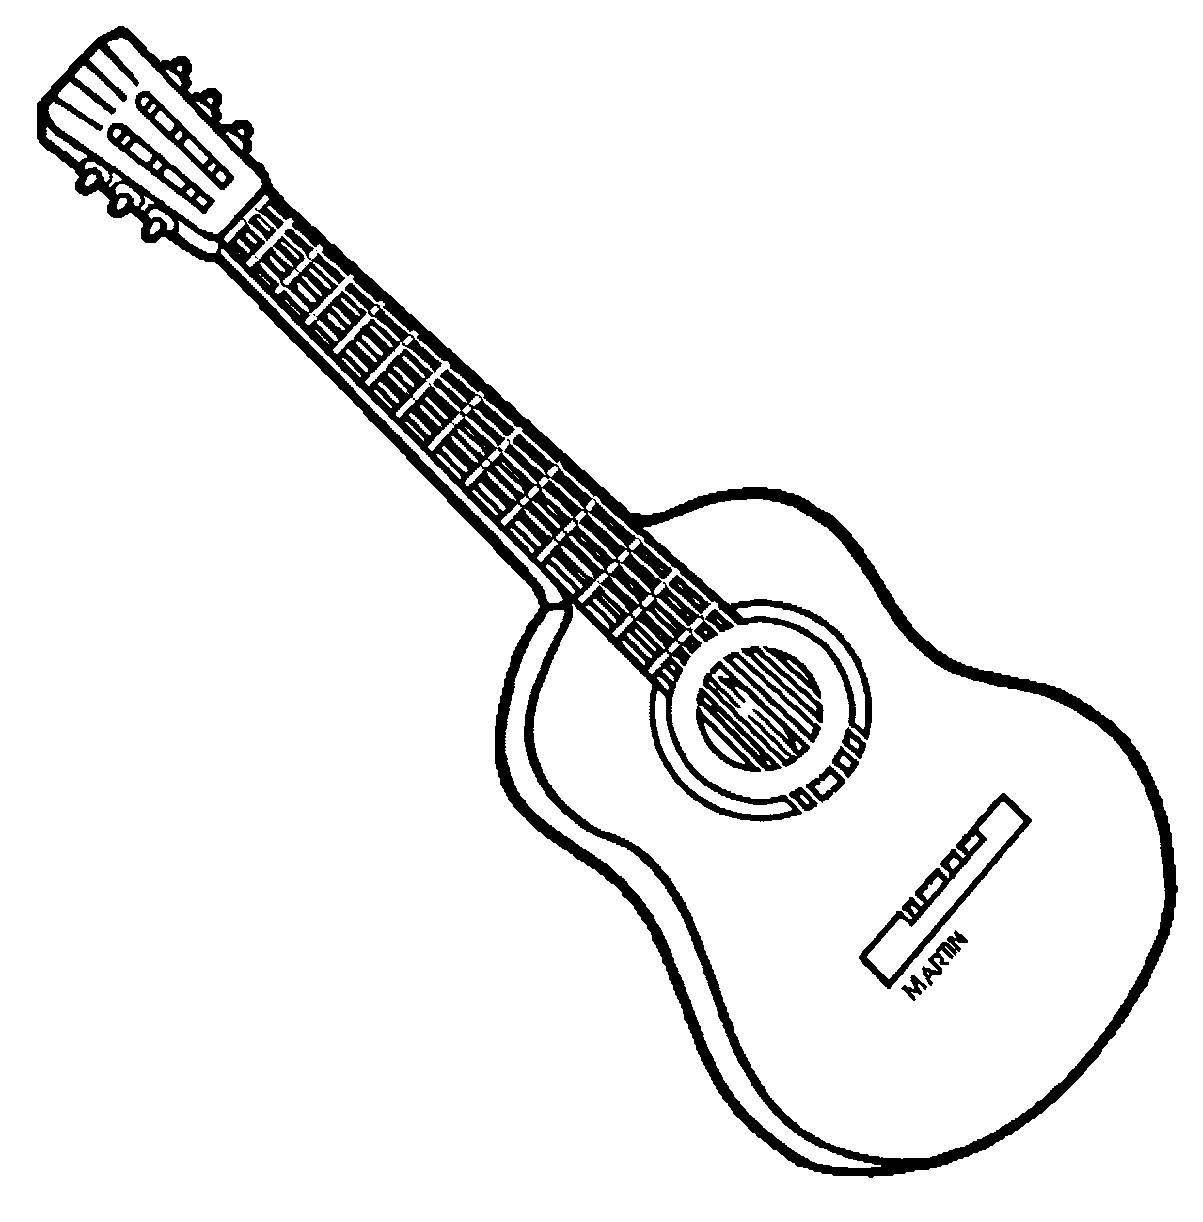 Strings Guitar Playing The Guitar Coloring Page | Wecoloringpage